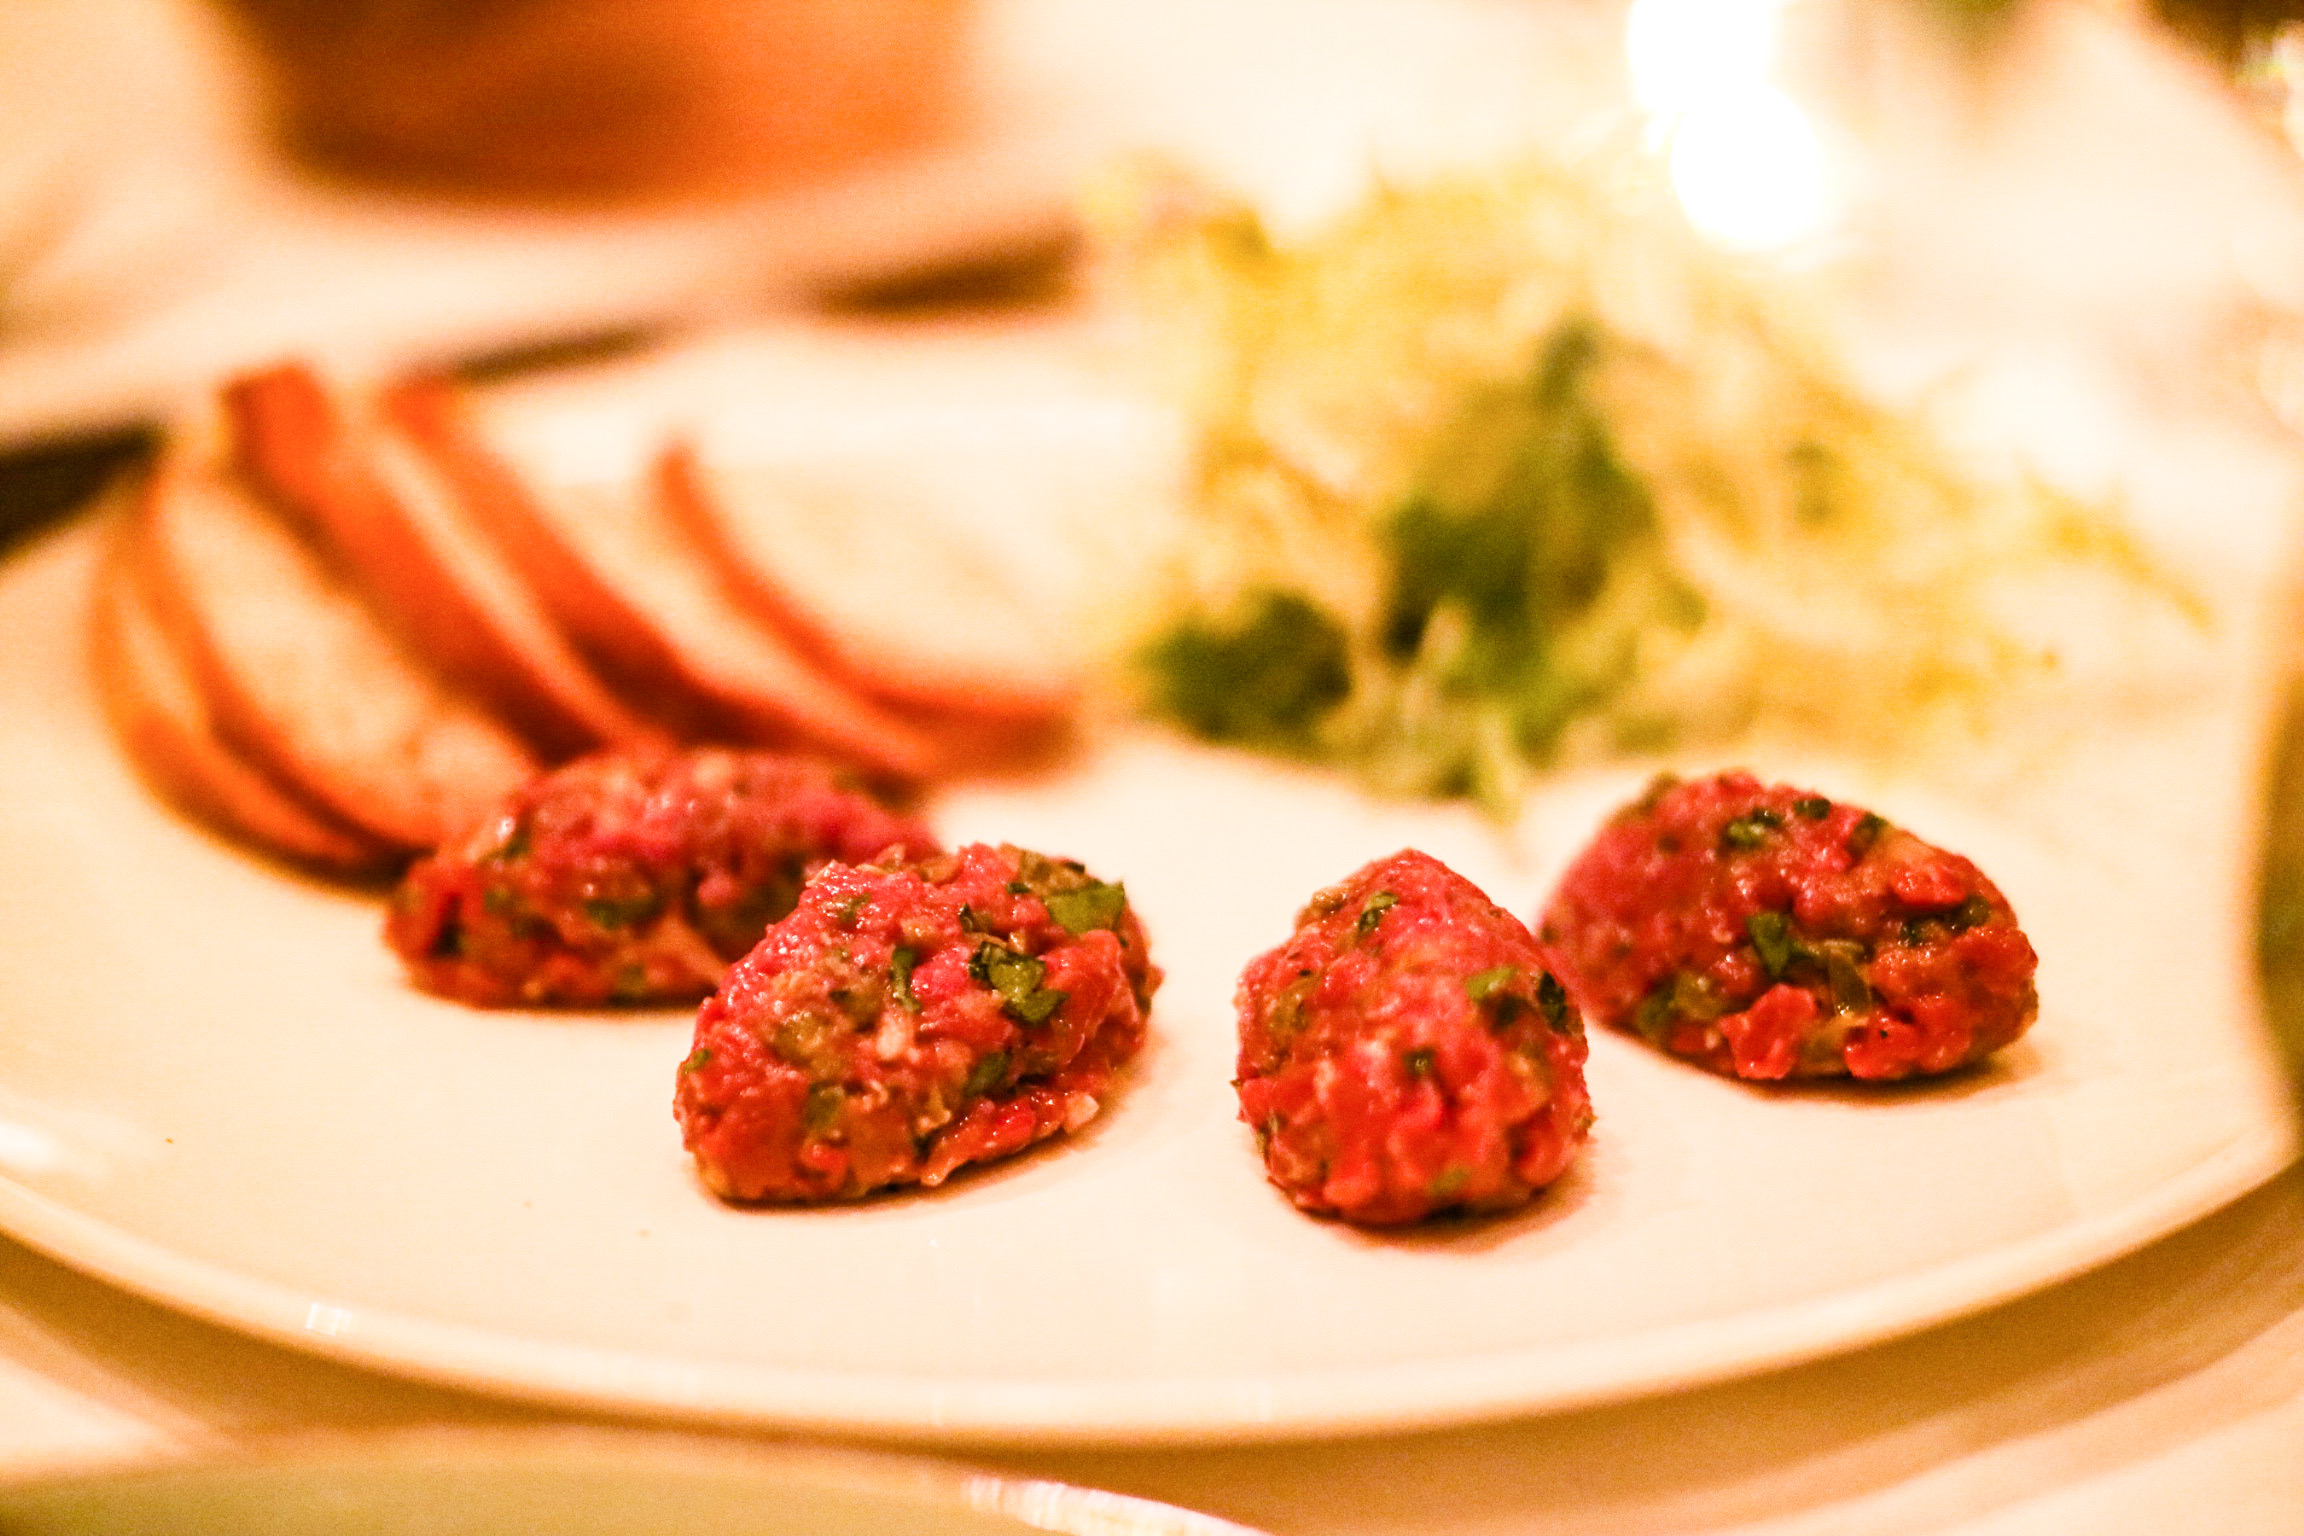 Beef Tartare @ The Grill Room